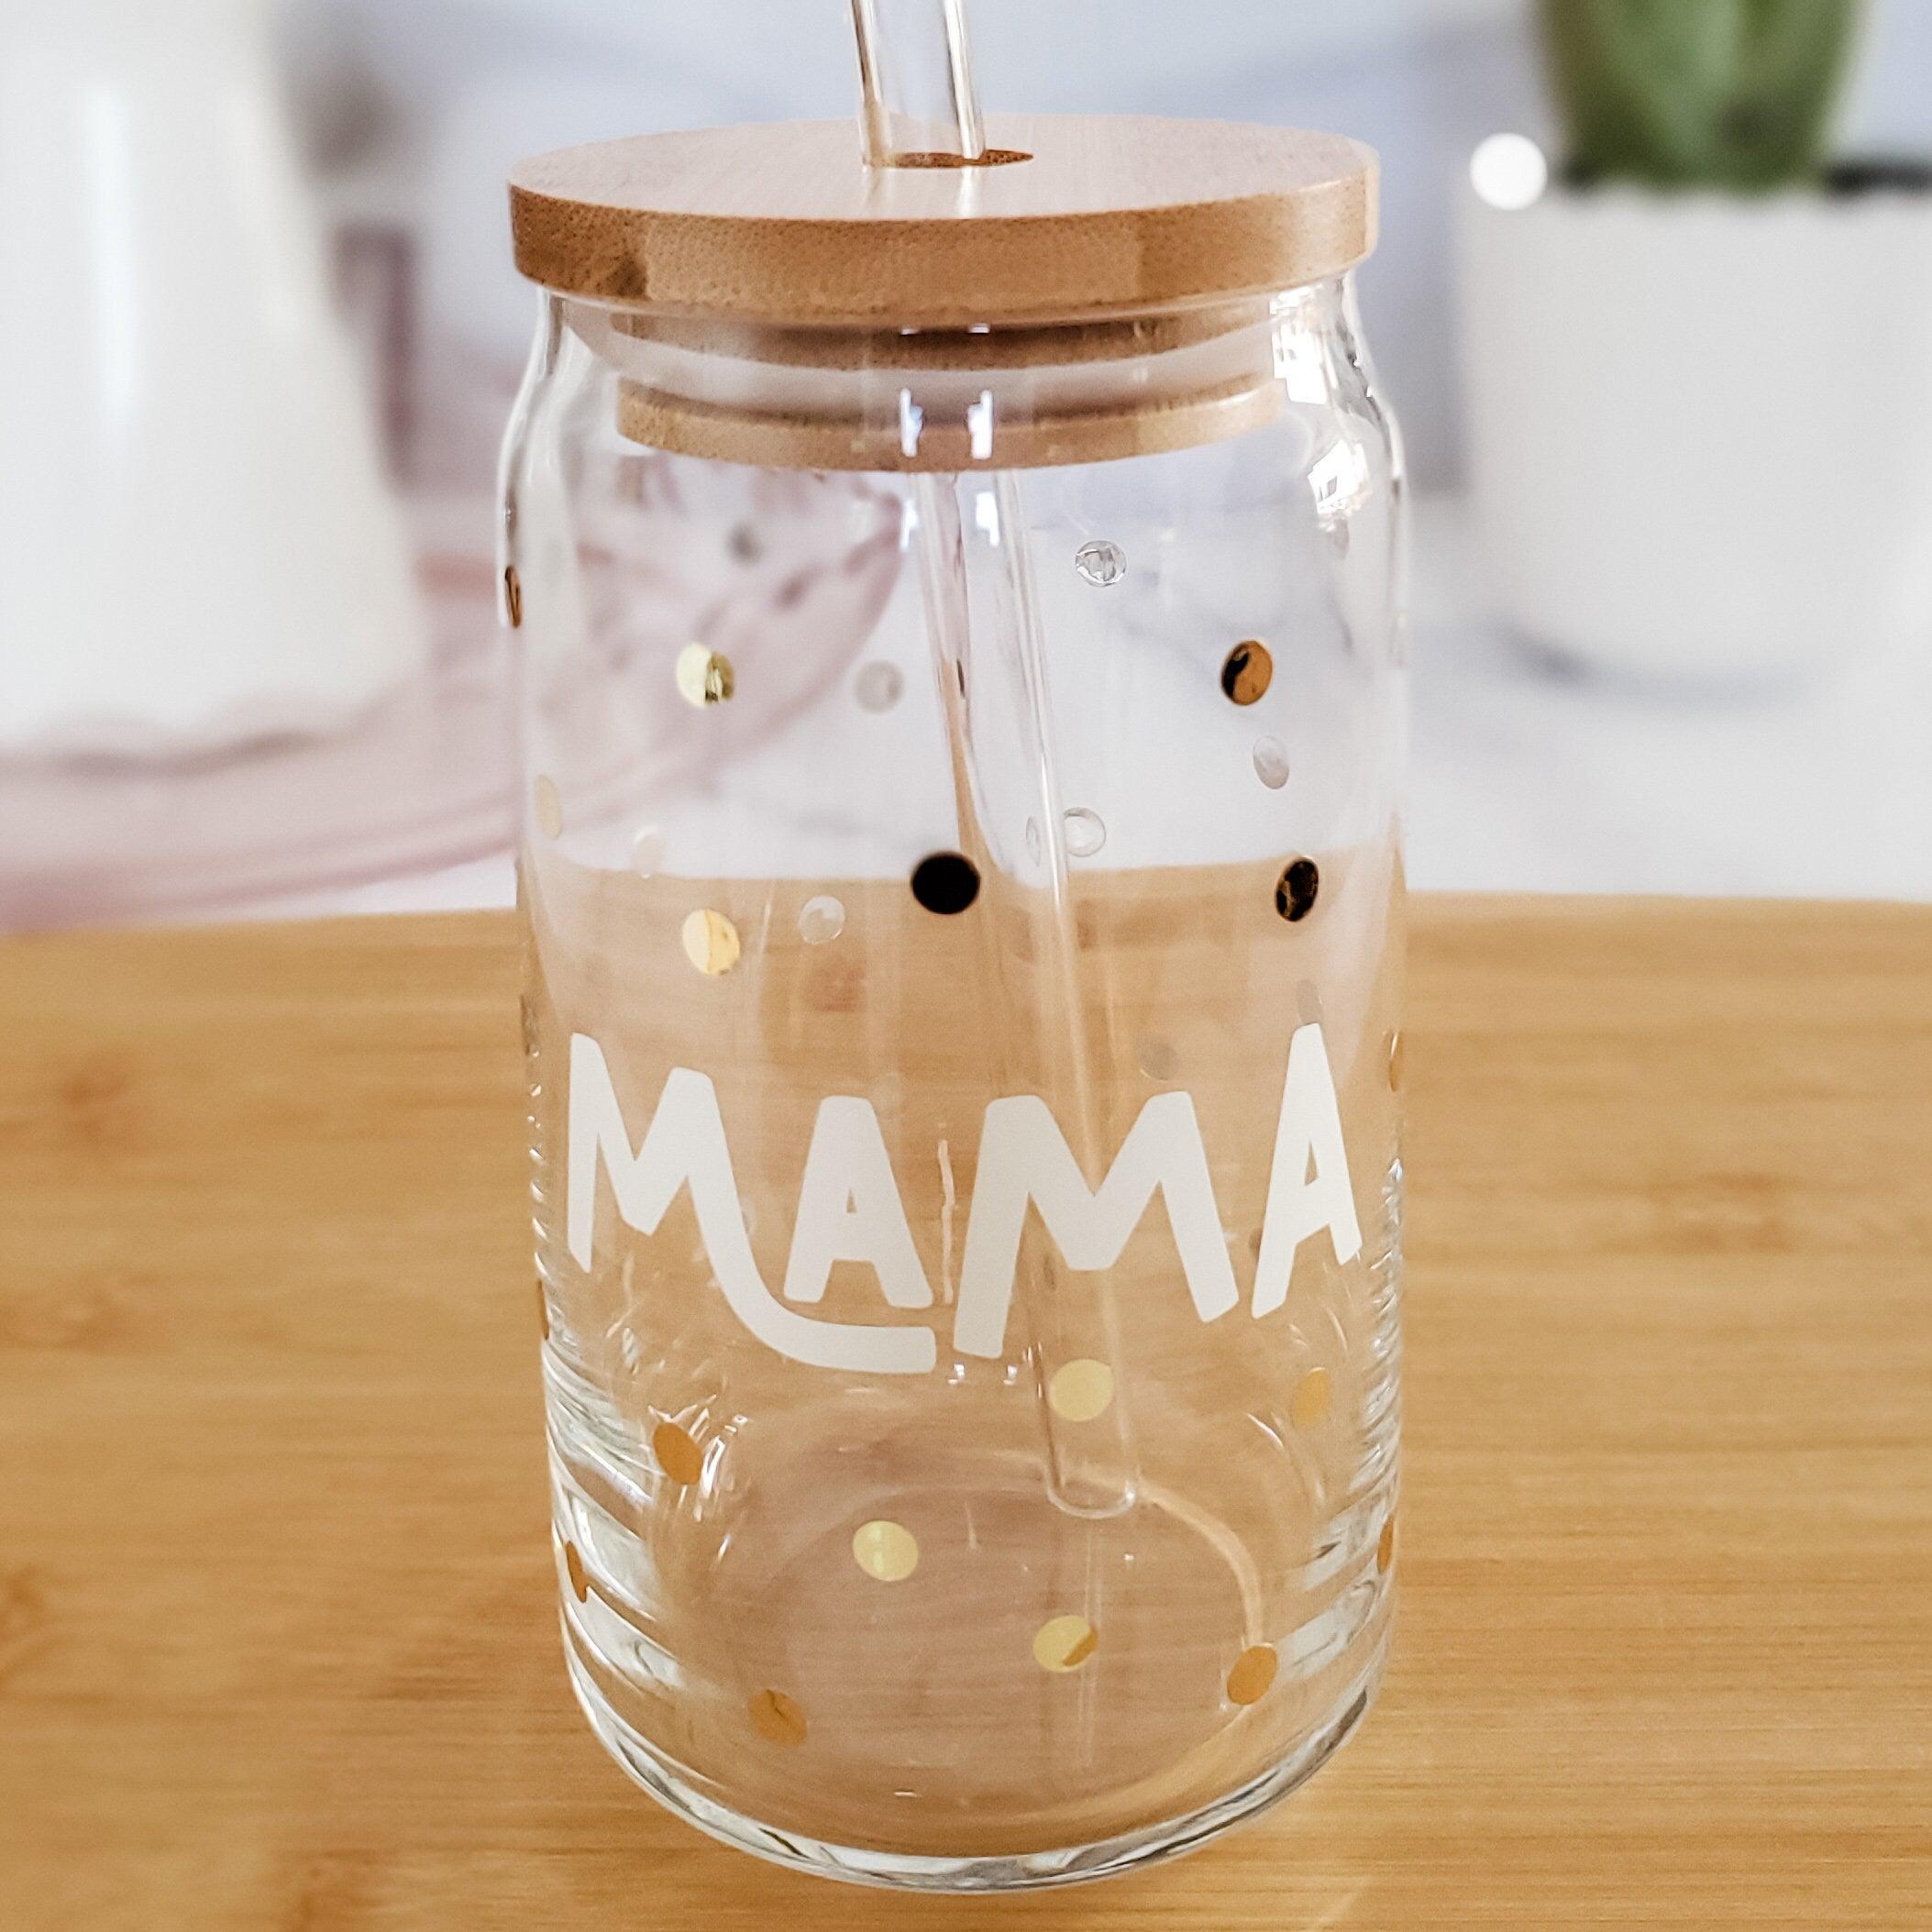 Mama and Mini Matching Tumbler Set - Color Changing Drink Tumblers for Baby Shower Gift - Mother's Day Gift for New Mom - Mommy and Me Cups